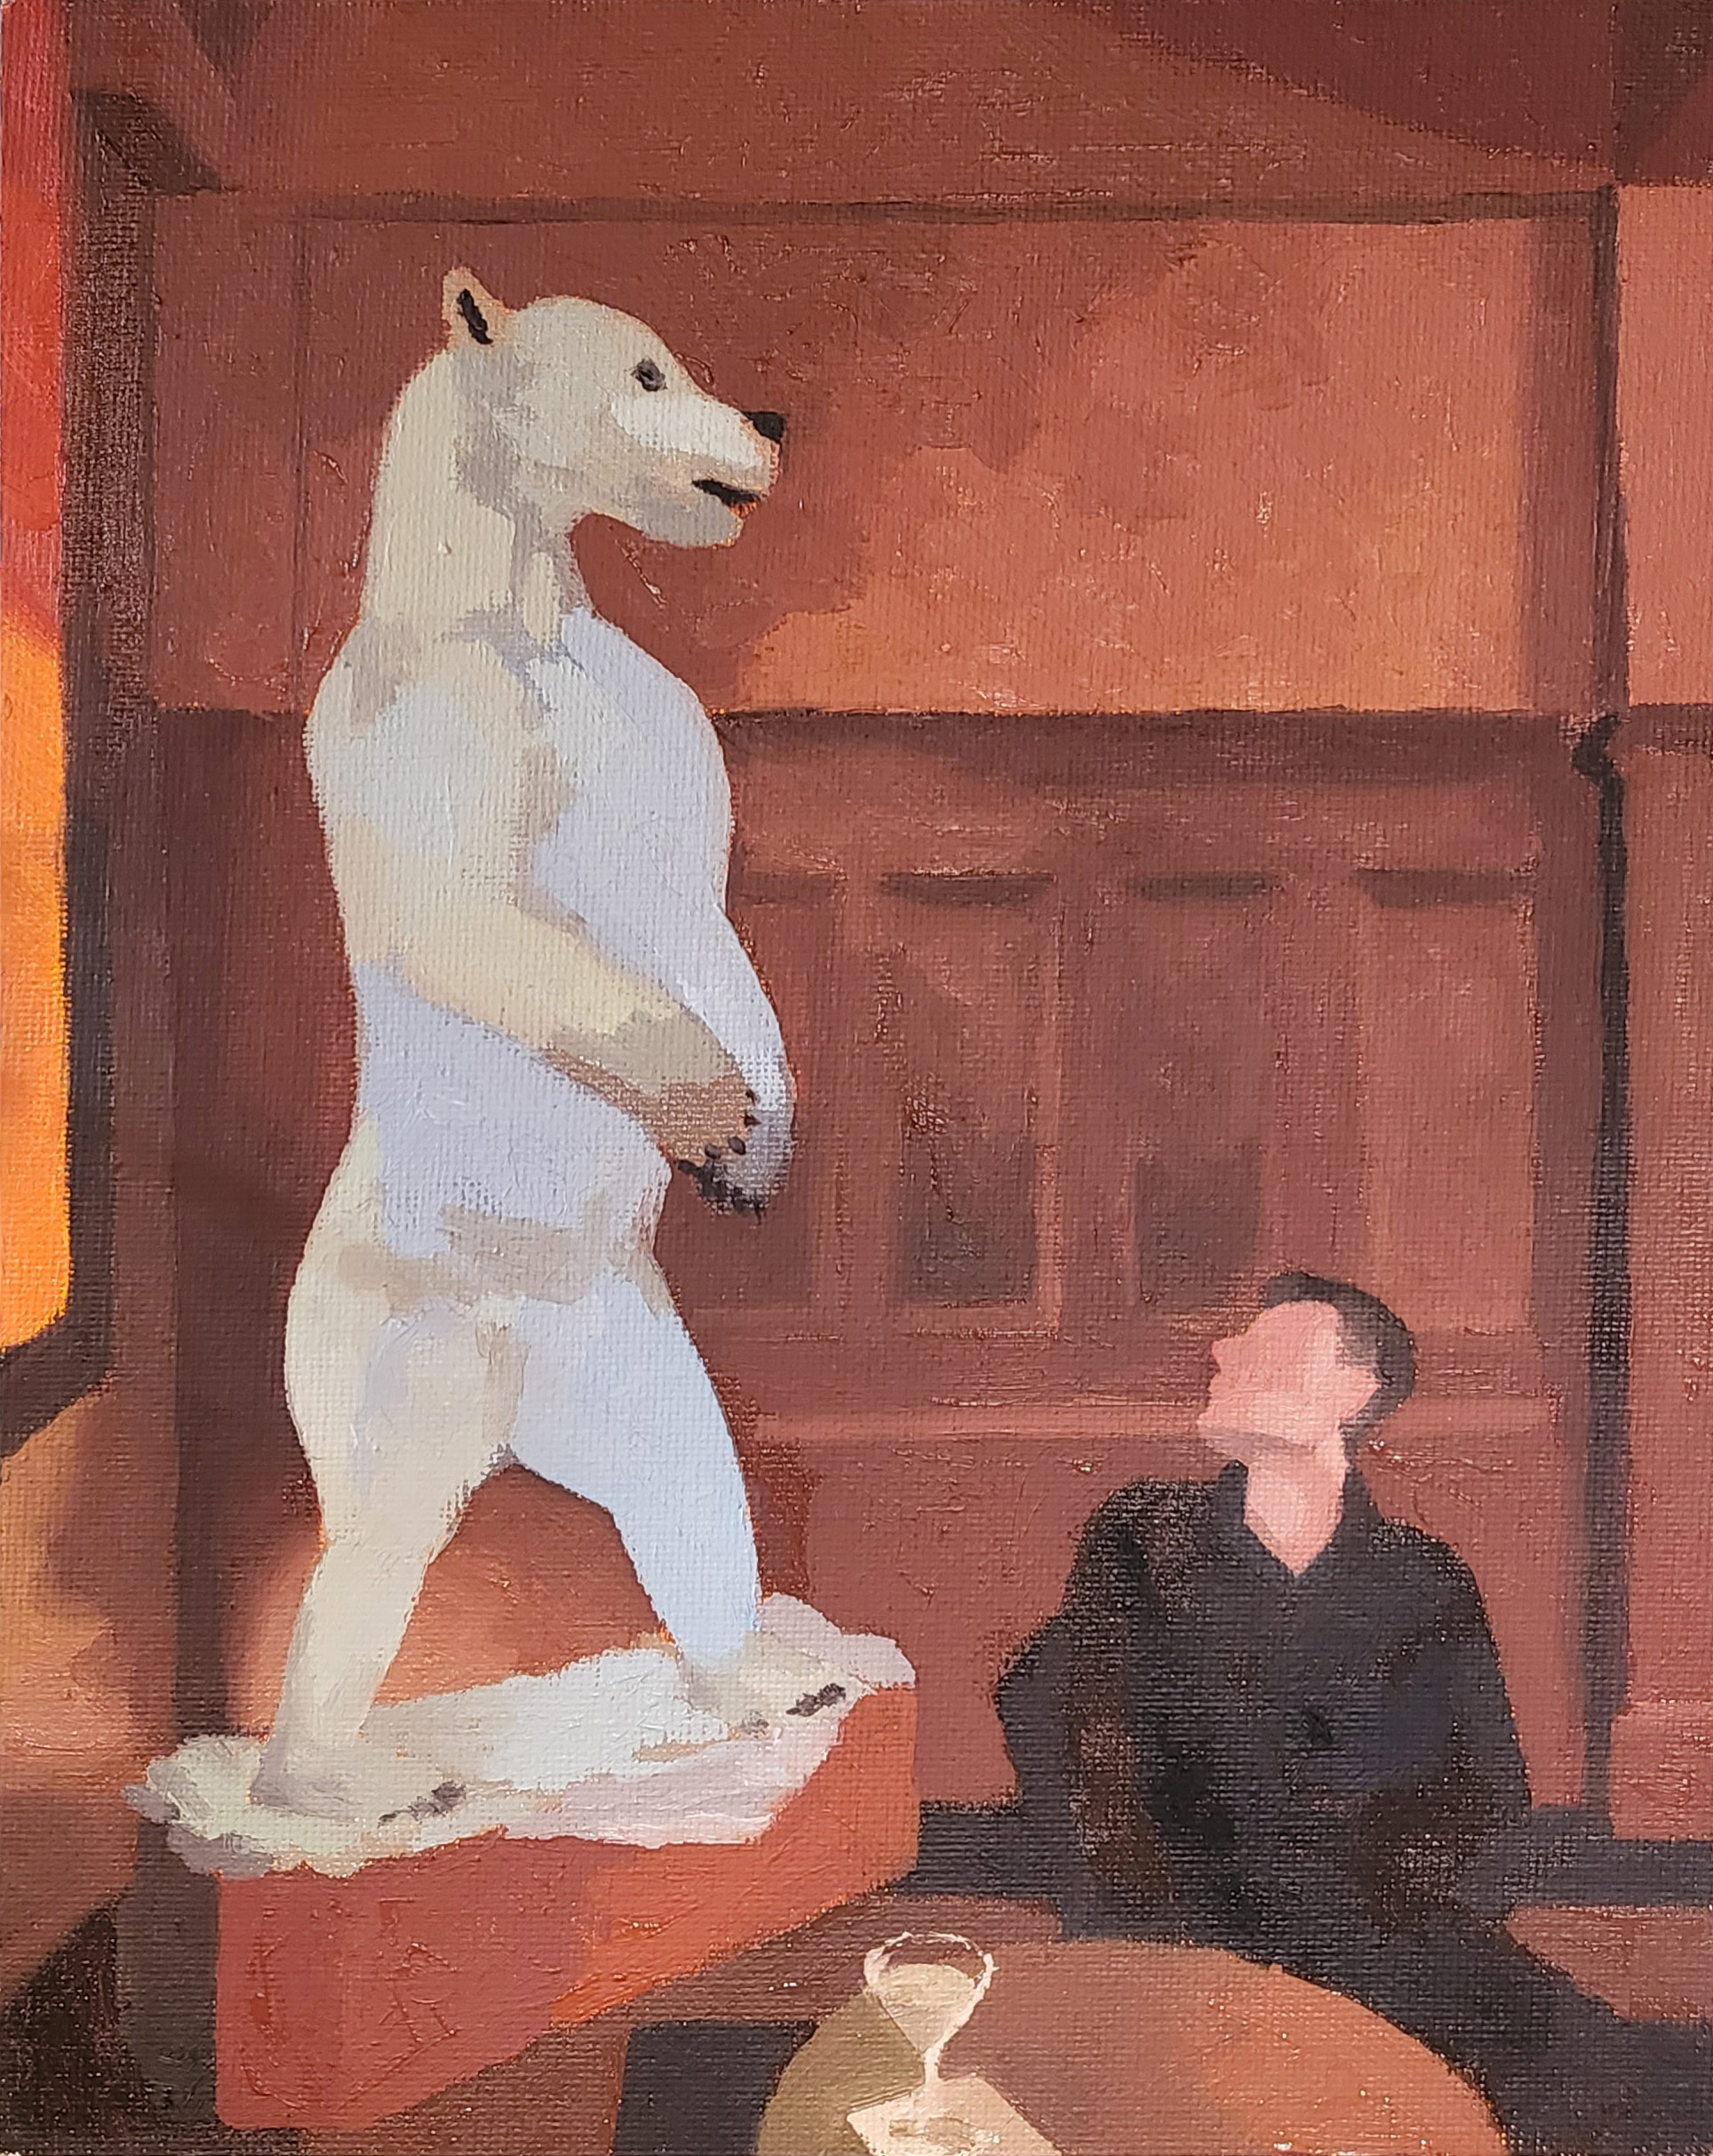 seated figure looking up at a lit up polar bear sculpture in a wood paneled room